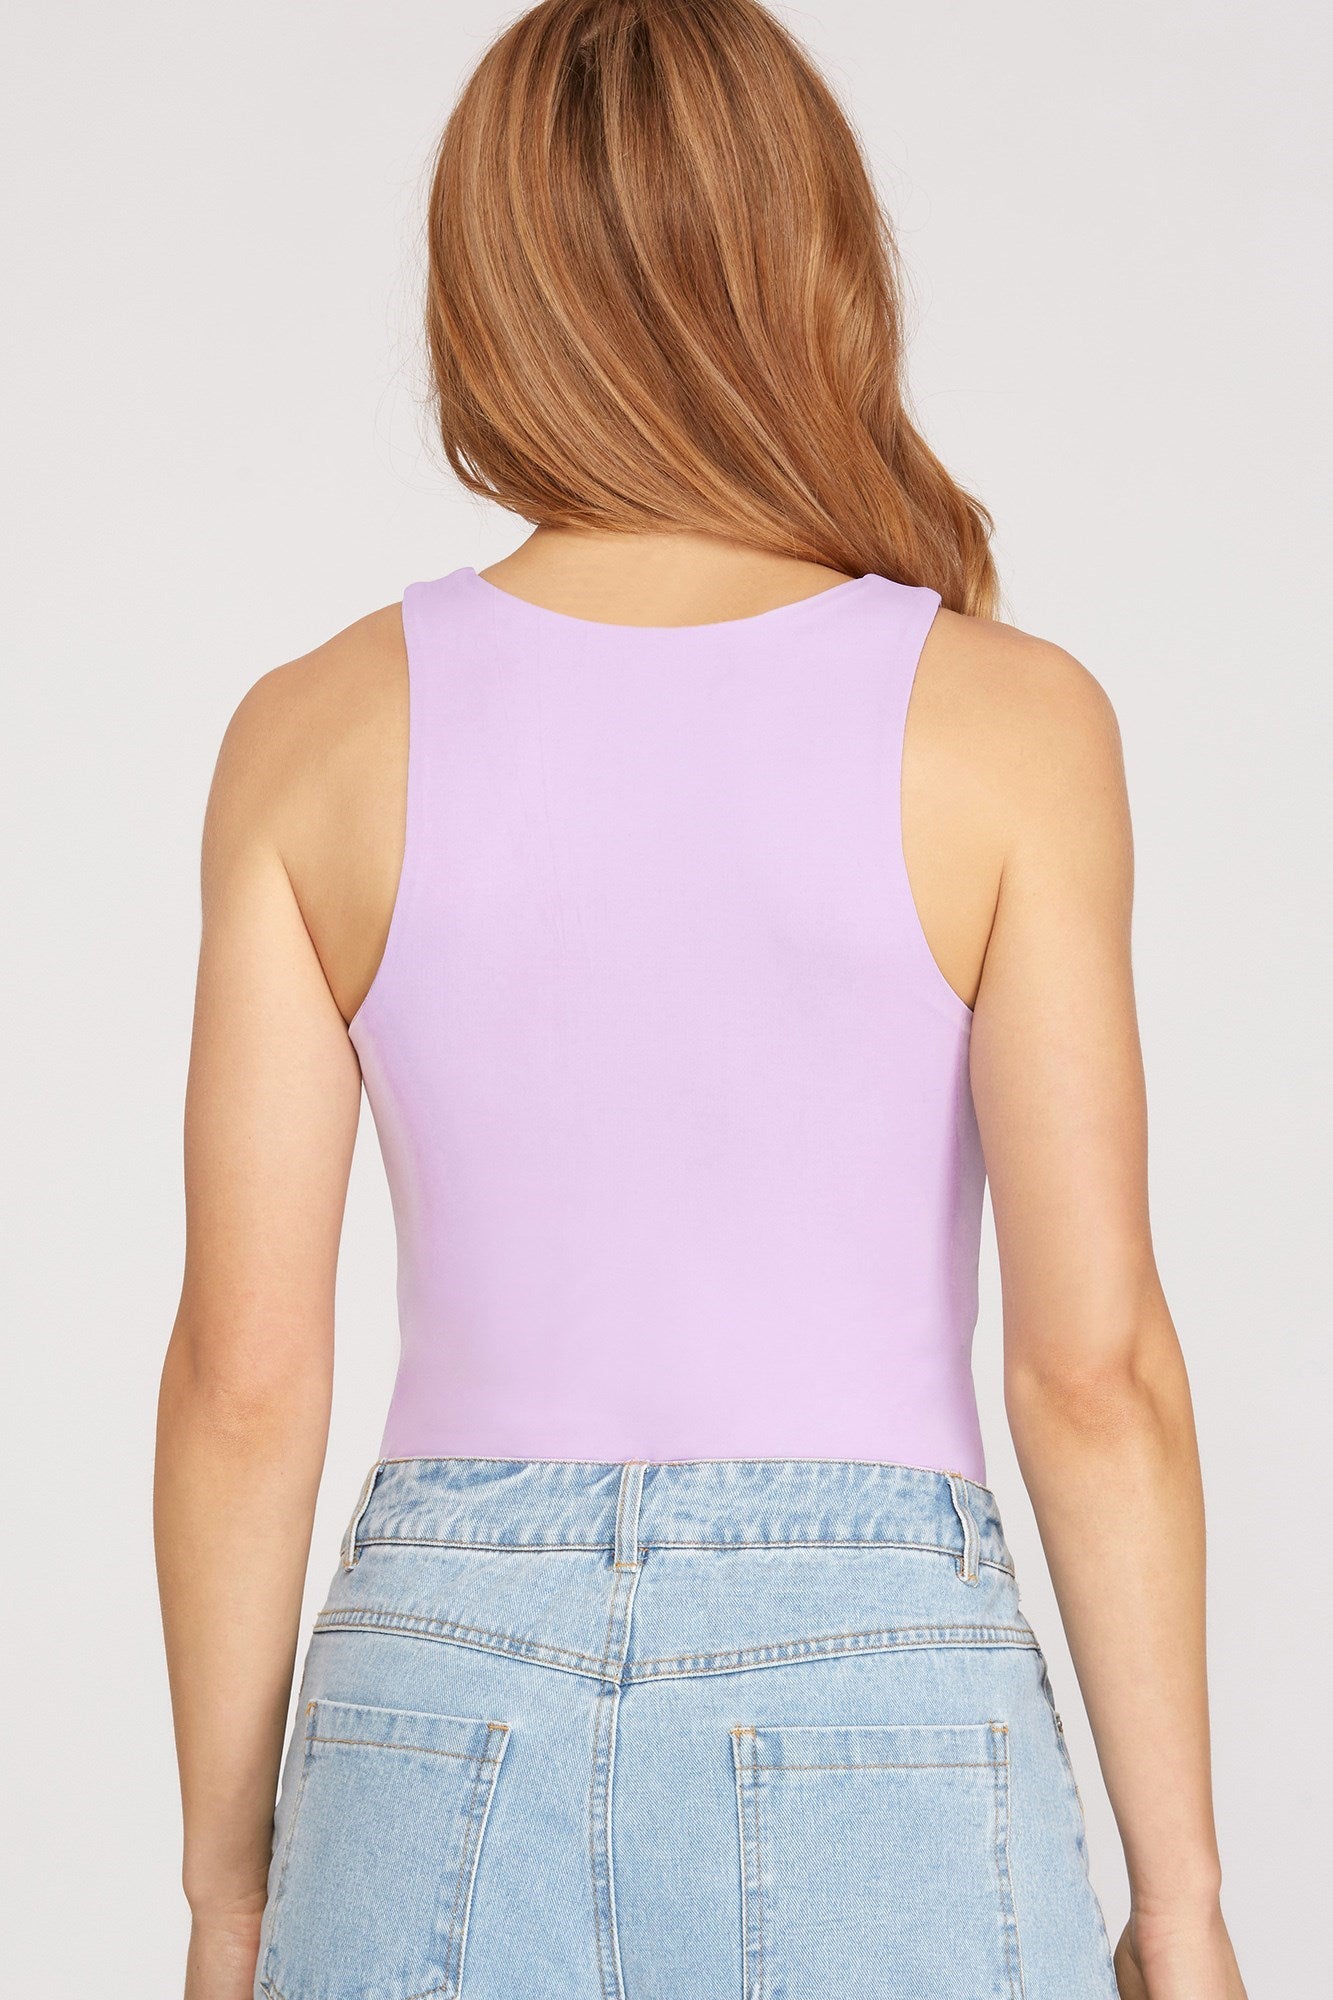 High Neck Bodysuit - Lavender-bodysuit- Hometown Style HTS, women's in store and online boutique located in Ingersoll, Ontario